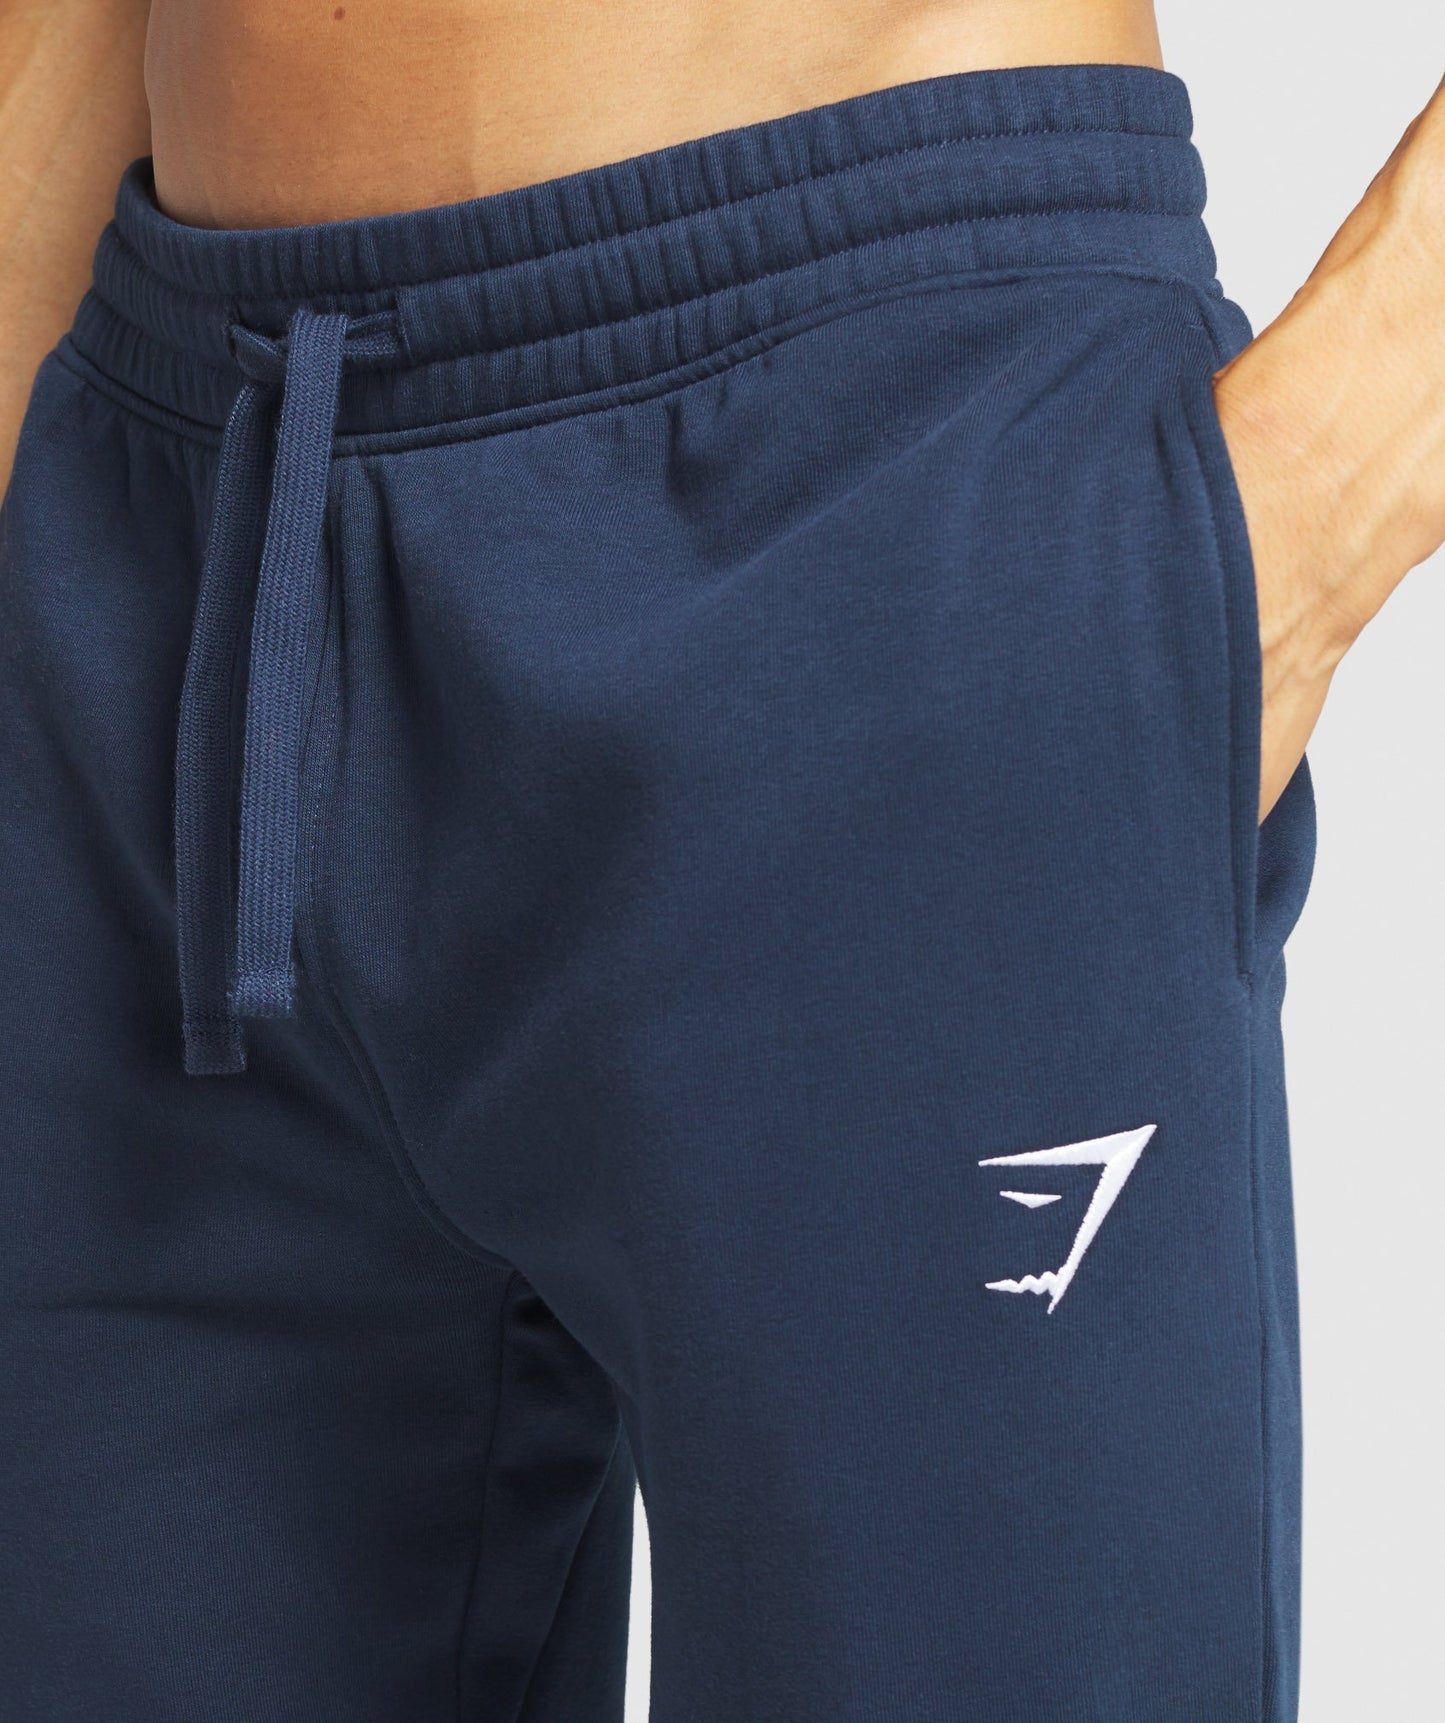 Gymshark Crest Joggers - Navy – Client 446 100K products